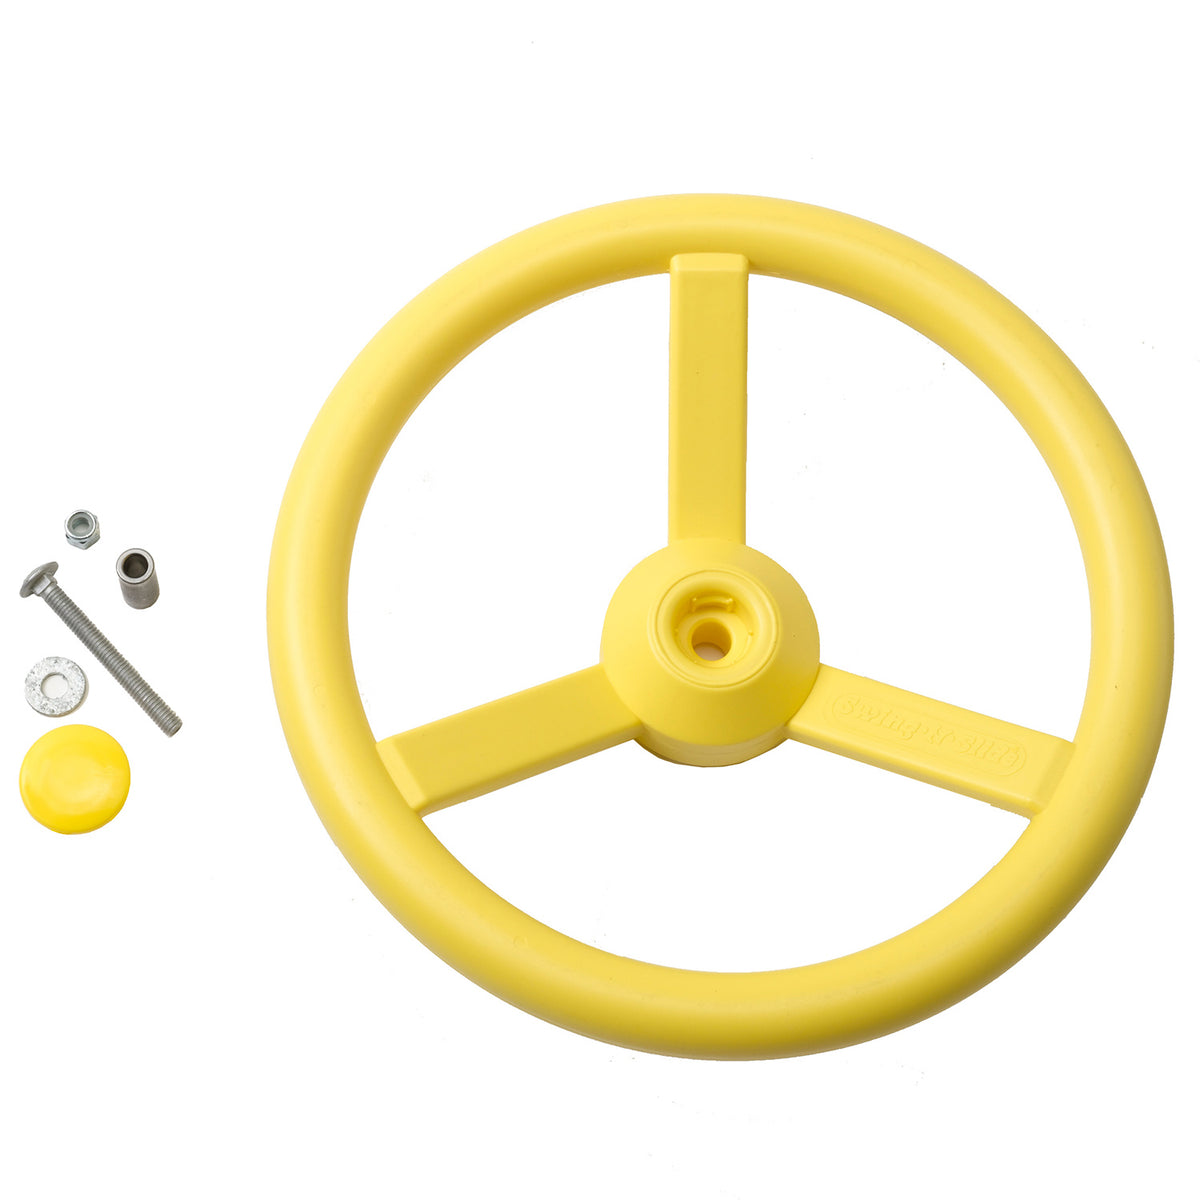 Gorilla-Playsets-Steering-Wheel-Yellow-W-Bolts-White-Back